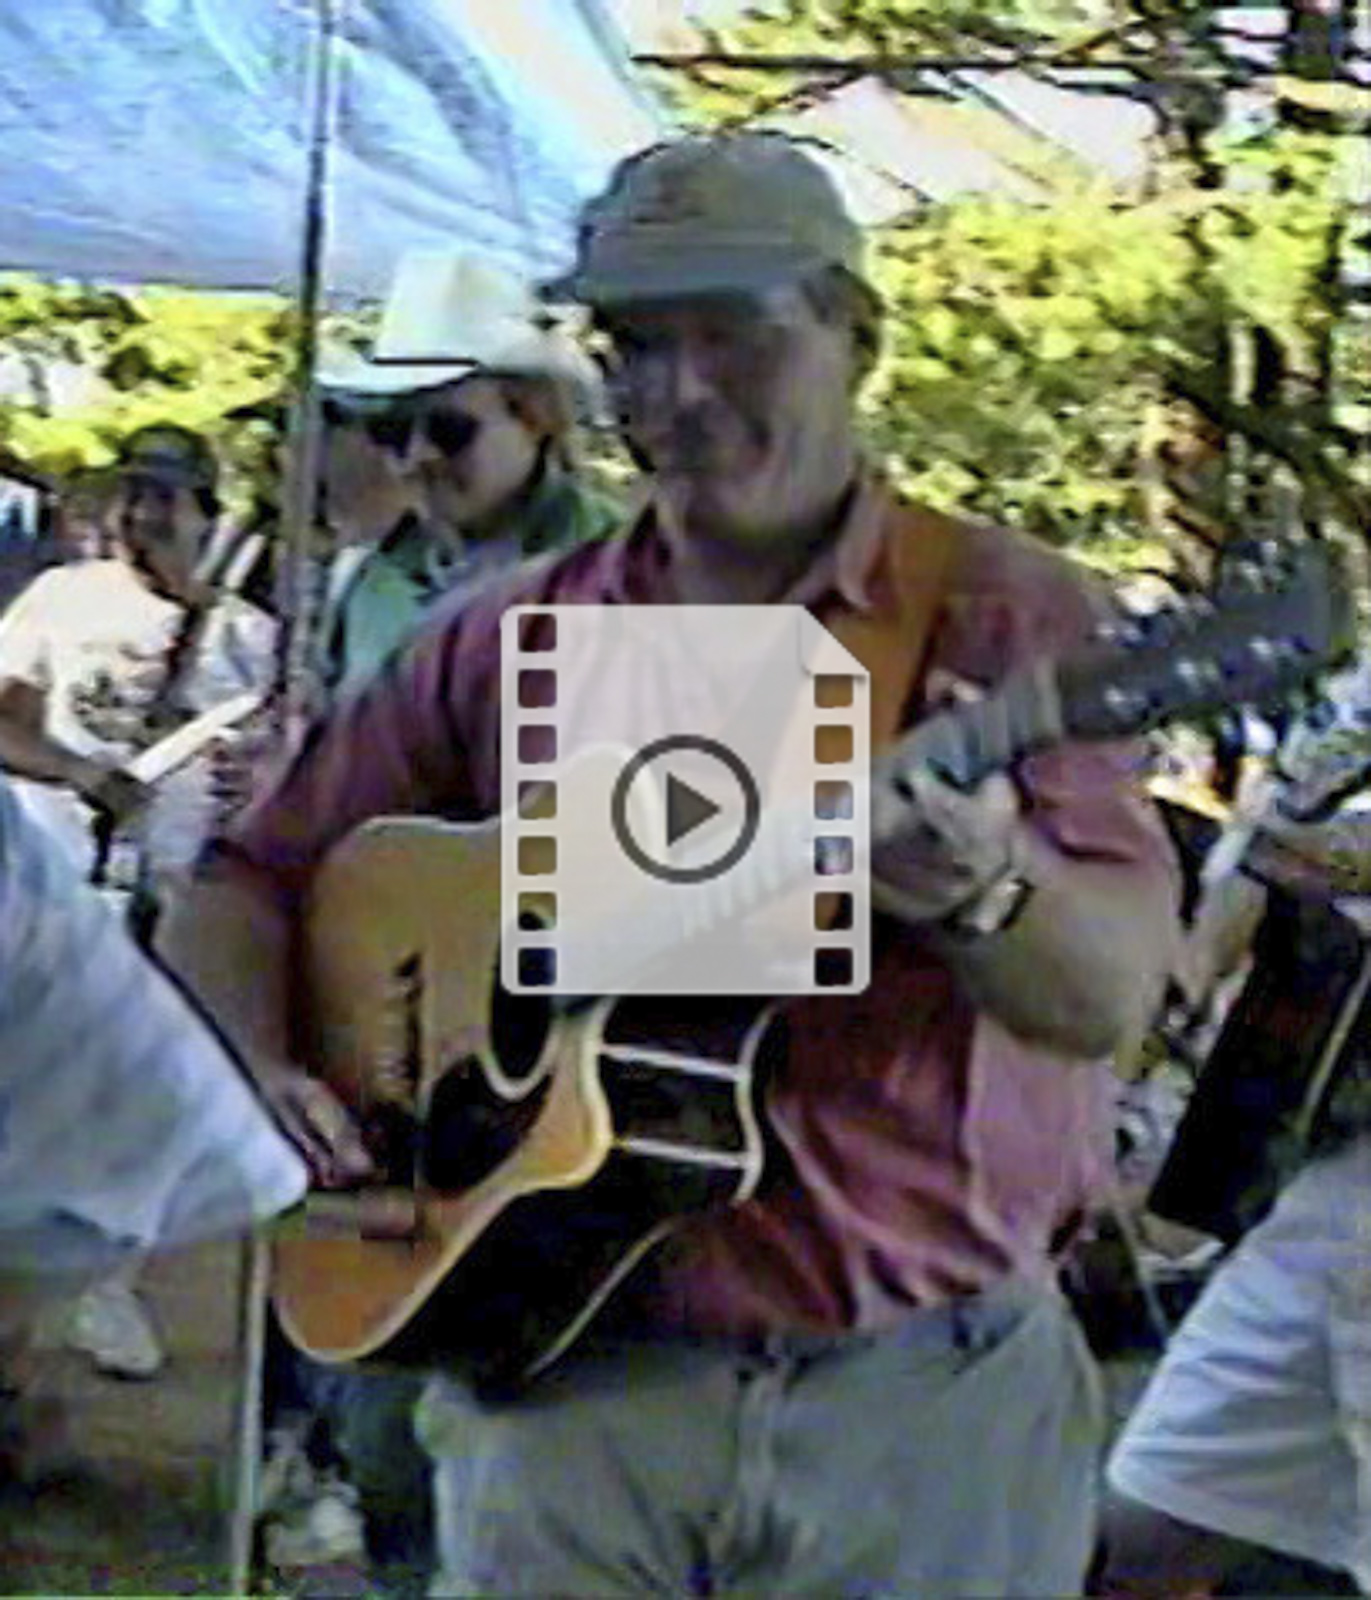 Money Honey Manic Mt. Boys campsite jam on the Tom Monahan original "Money Honey" at the Thomas Pt. Beach Bluegrass Festival over Labor Day weekend 1995. With Tom Monahan: lead vocal, guitar; Jon Ross: mandolin; Joyce Anderson: fiddle; Jamie Peghiny: bass; George Gibson: guitar; and Ed Stern: banjo. Milling around in the background are guest appearances by Catya VK, Steve Bixby, Stuart Rocheford, Tom Bowman, Claudia Hearn, Betsy Rome, and Todd Shattuck.